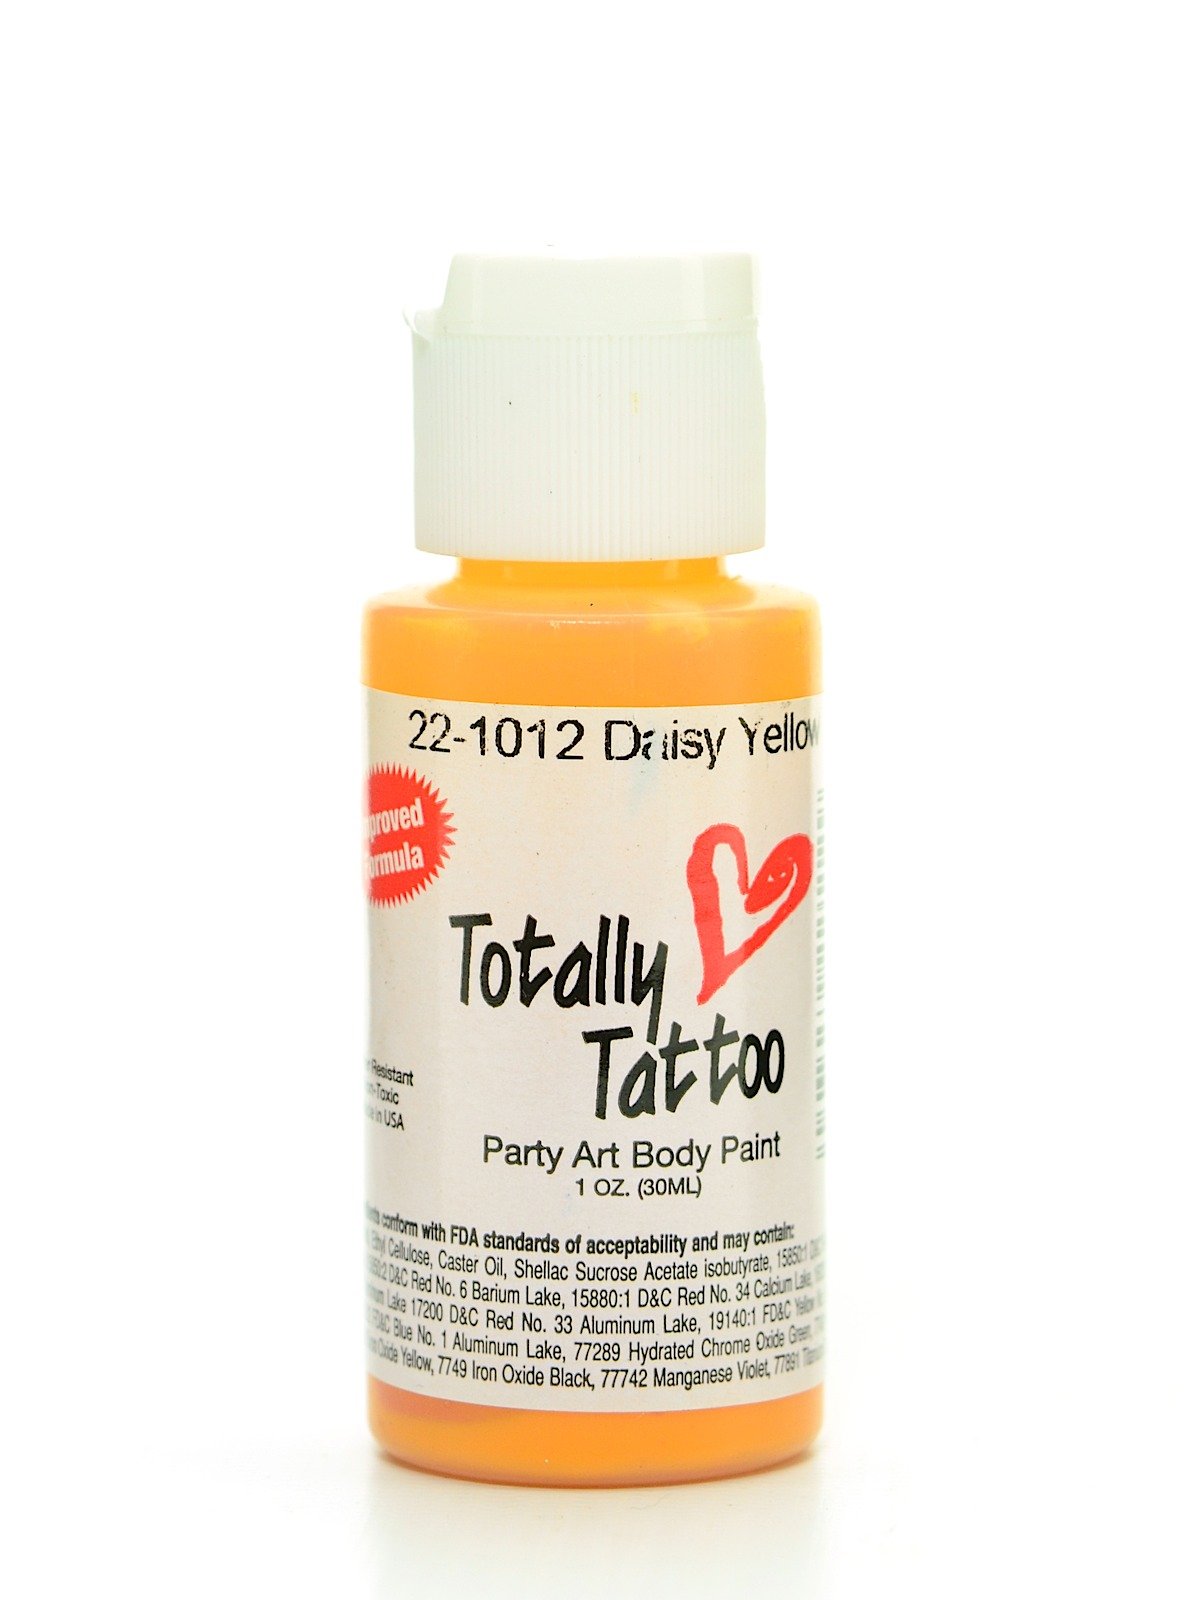 Totally Me airbrush and tattoo kit review 